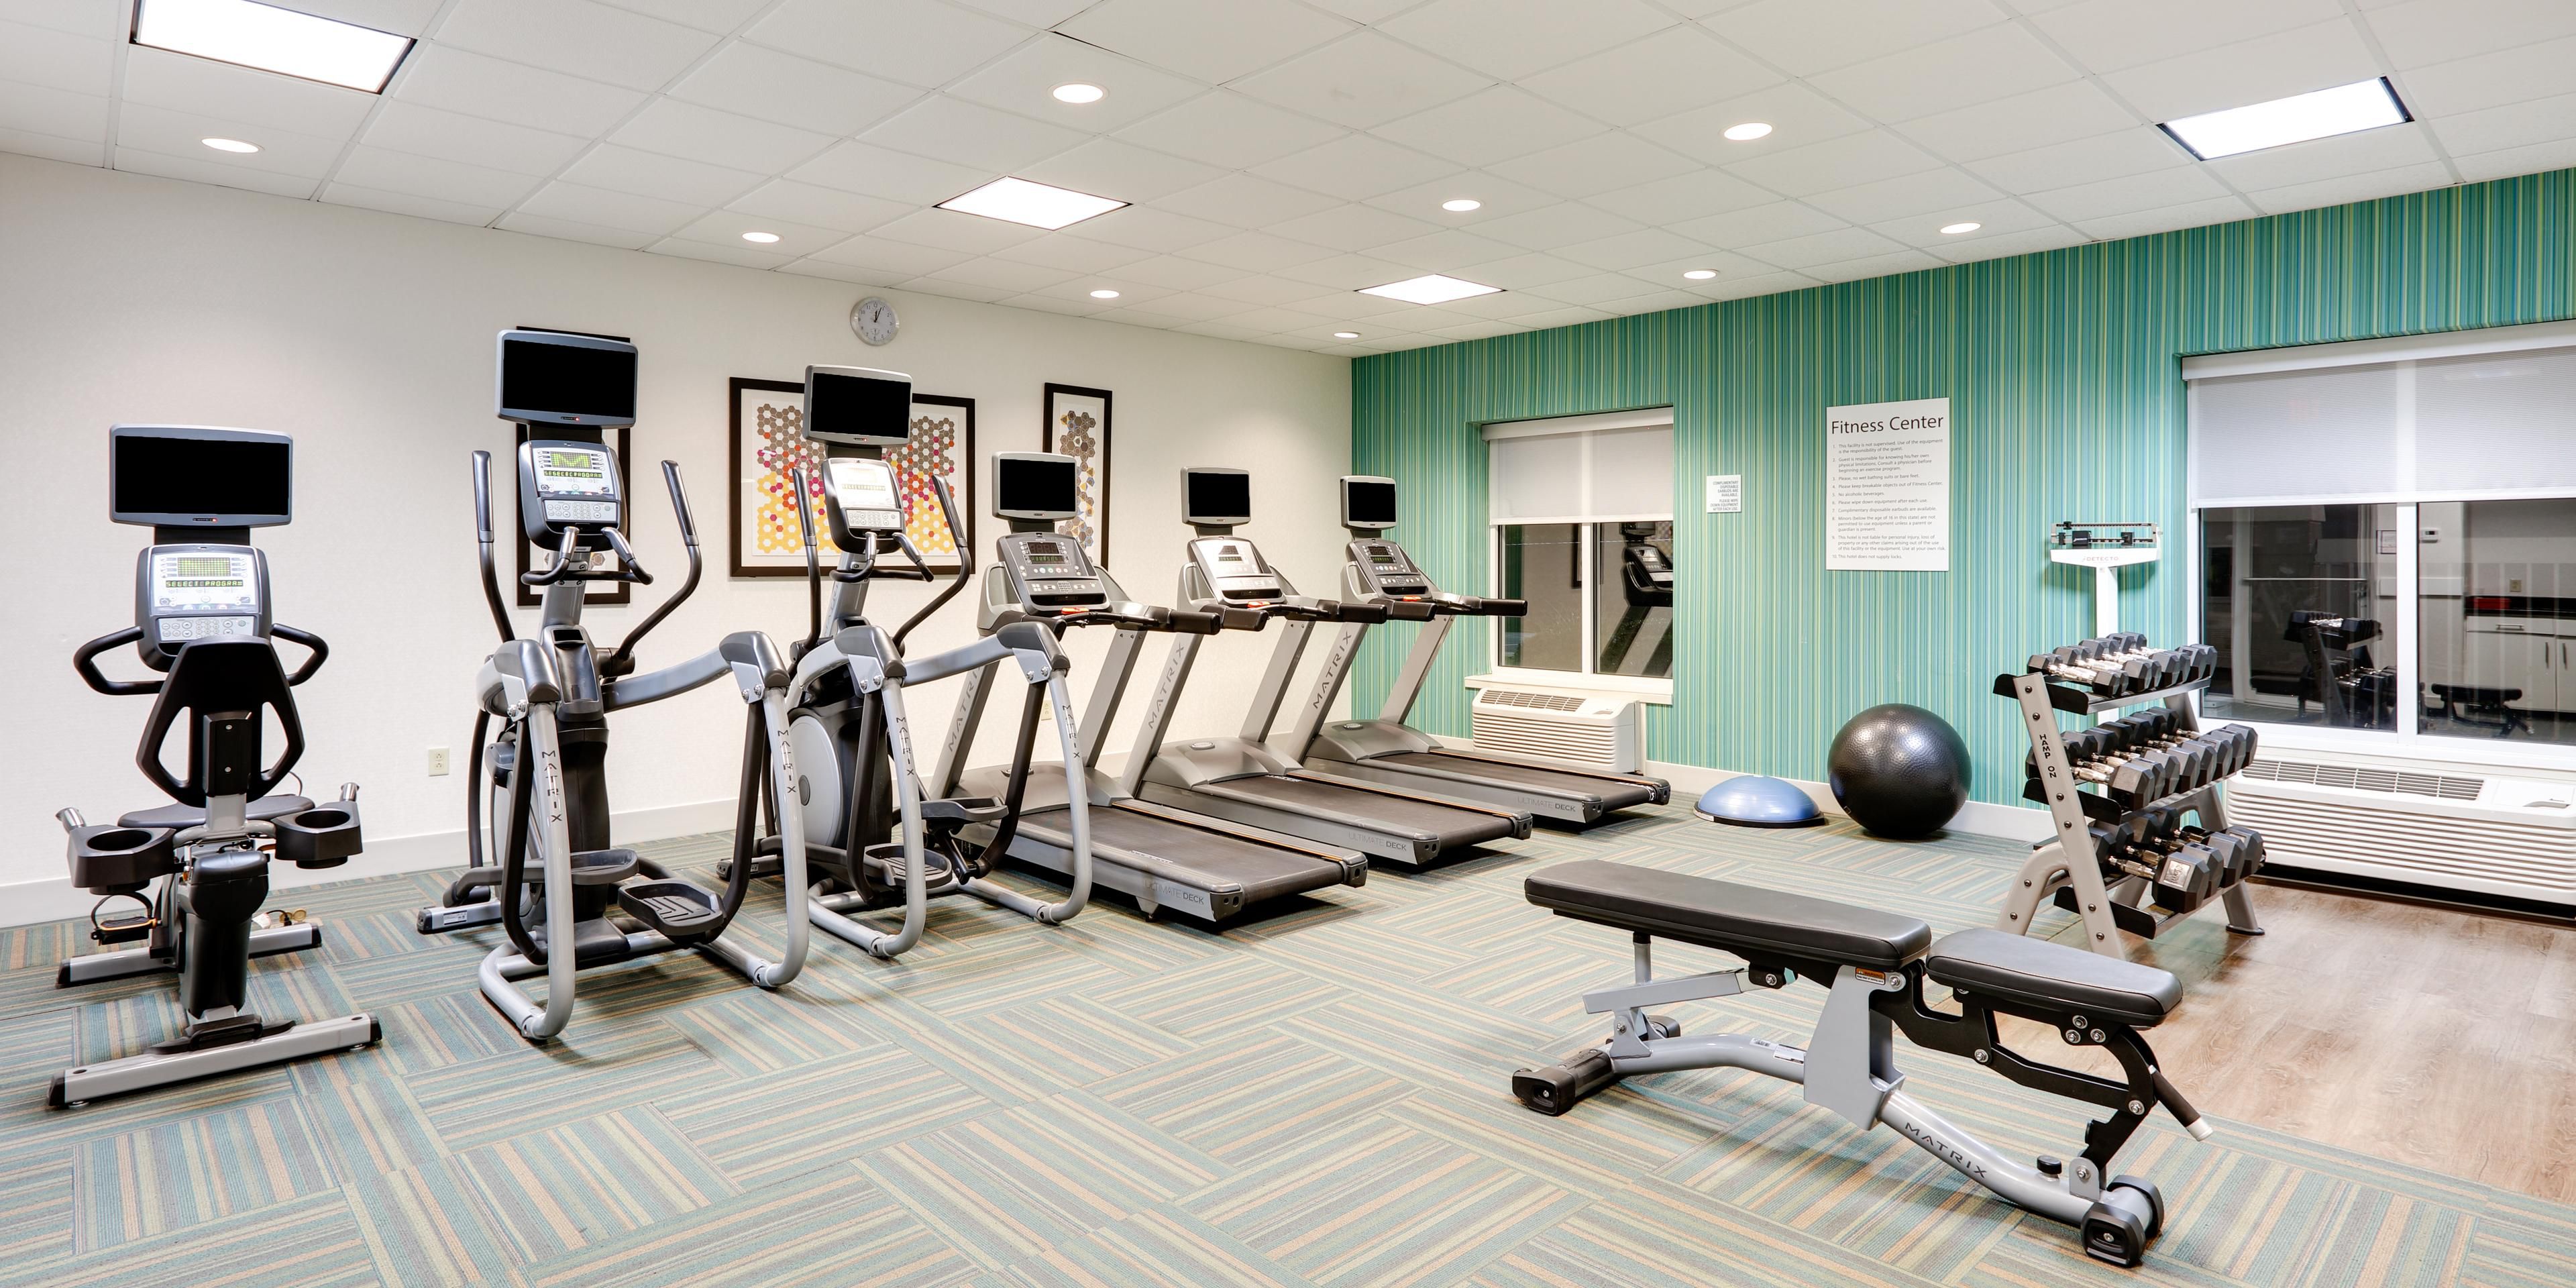 Start your day off feeling your best. Treadmills, stationary bike and Elliptical now include their own individual television screens so you can choose what you watch while you work out! Hand weights, yoga mats, free weights, bench and medicine balls are available in our open workout area.